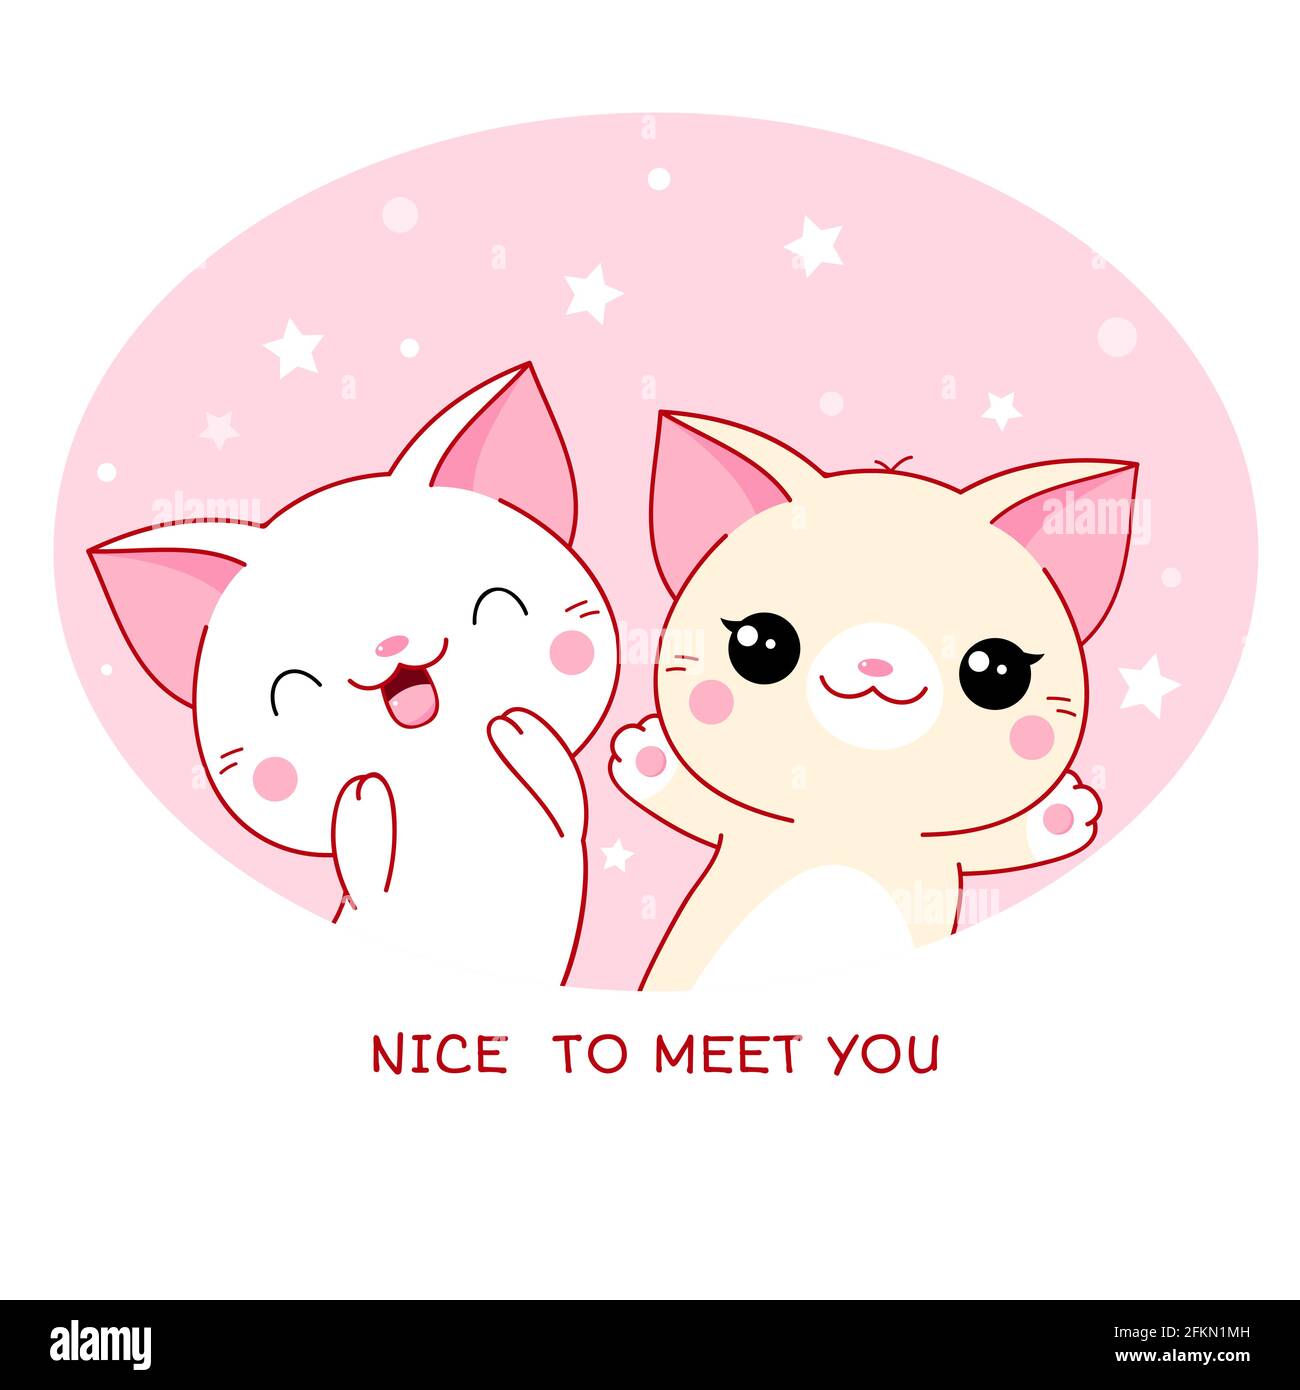 https://c8.alamy.com/comp/2FKN1MH/greeting-card-with-kawaii-cats-two-cute-kitten-and-inscription-nice-to-meet-you-vector-illustration-eps8-2FKN1MH.jpg